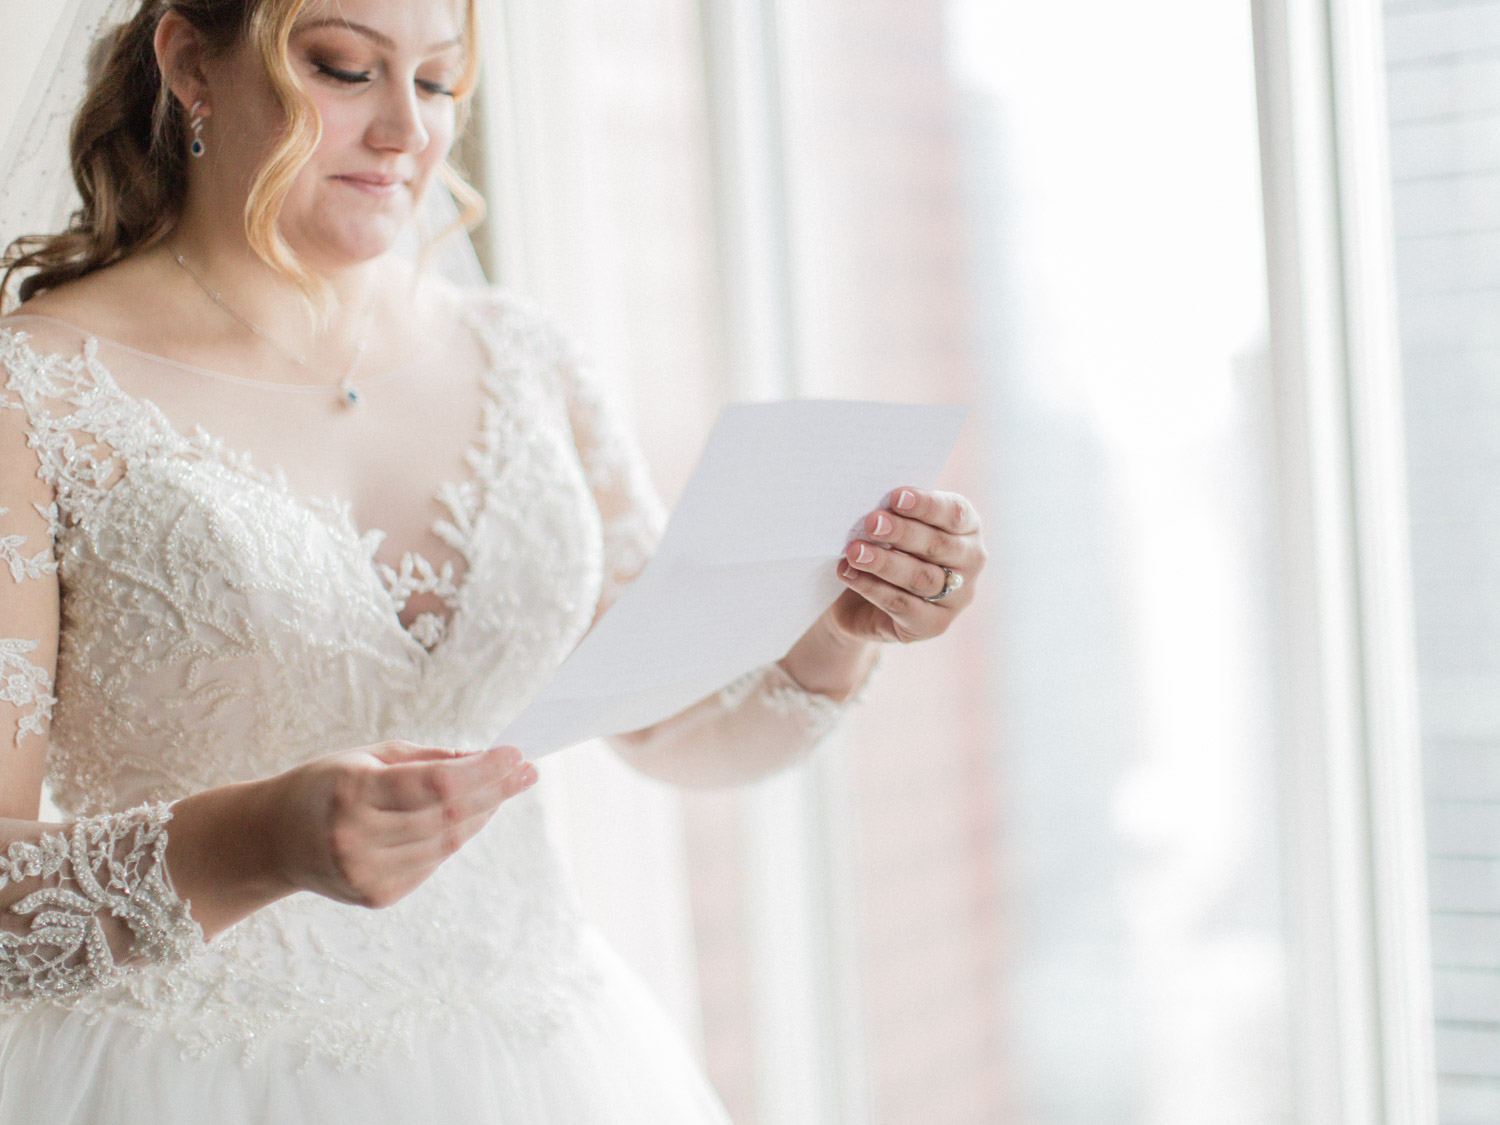 Timeless winter wedding photographs at one king west hotel, by toronto photogrpaher corynn fowler photography